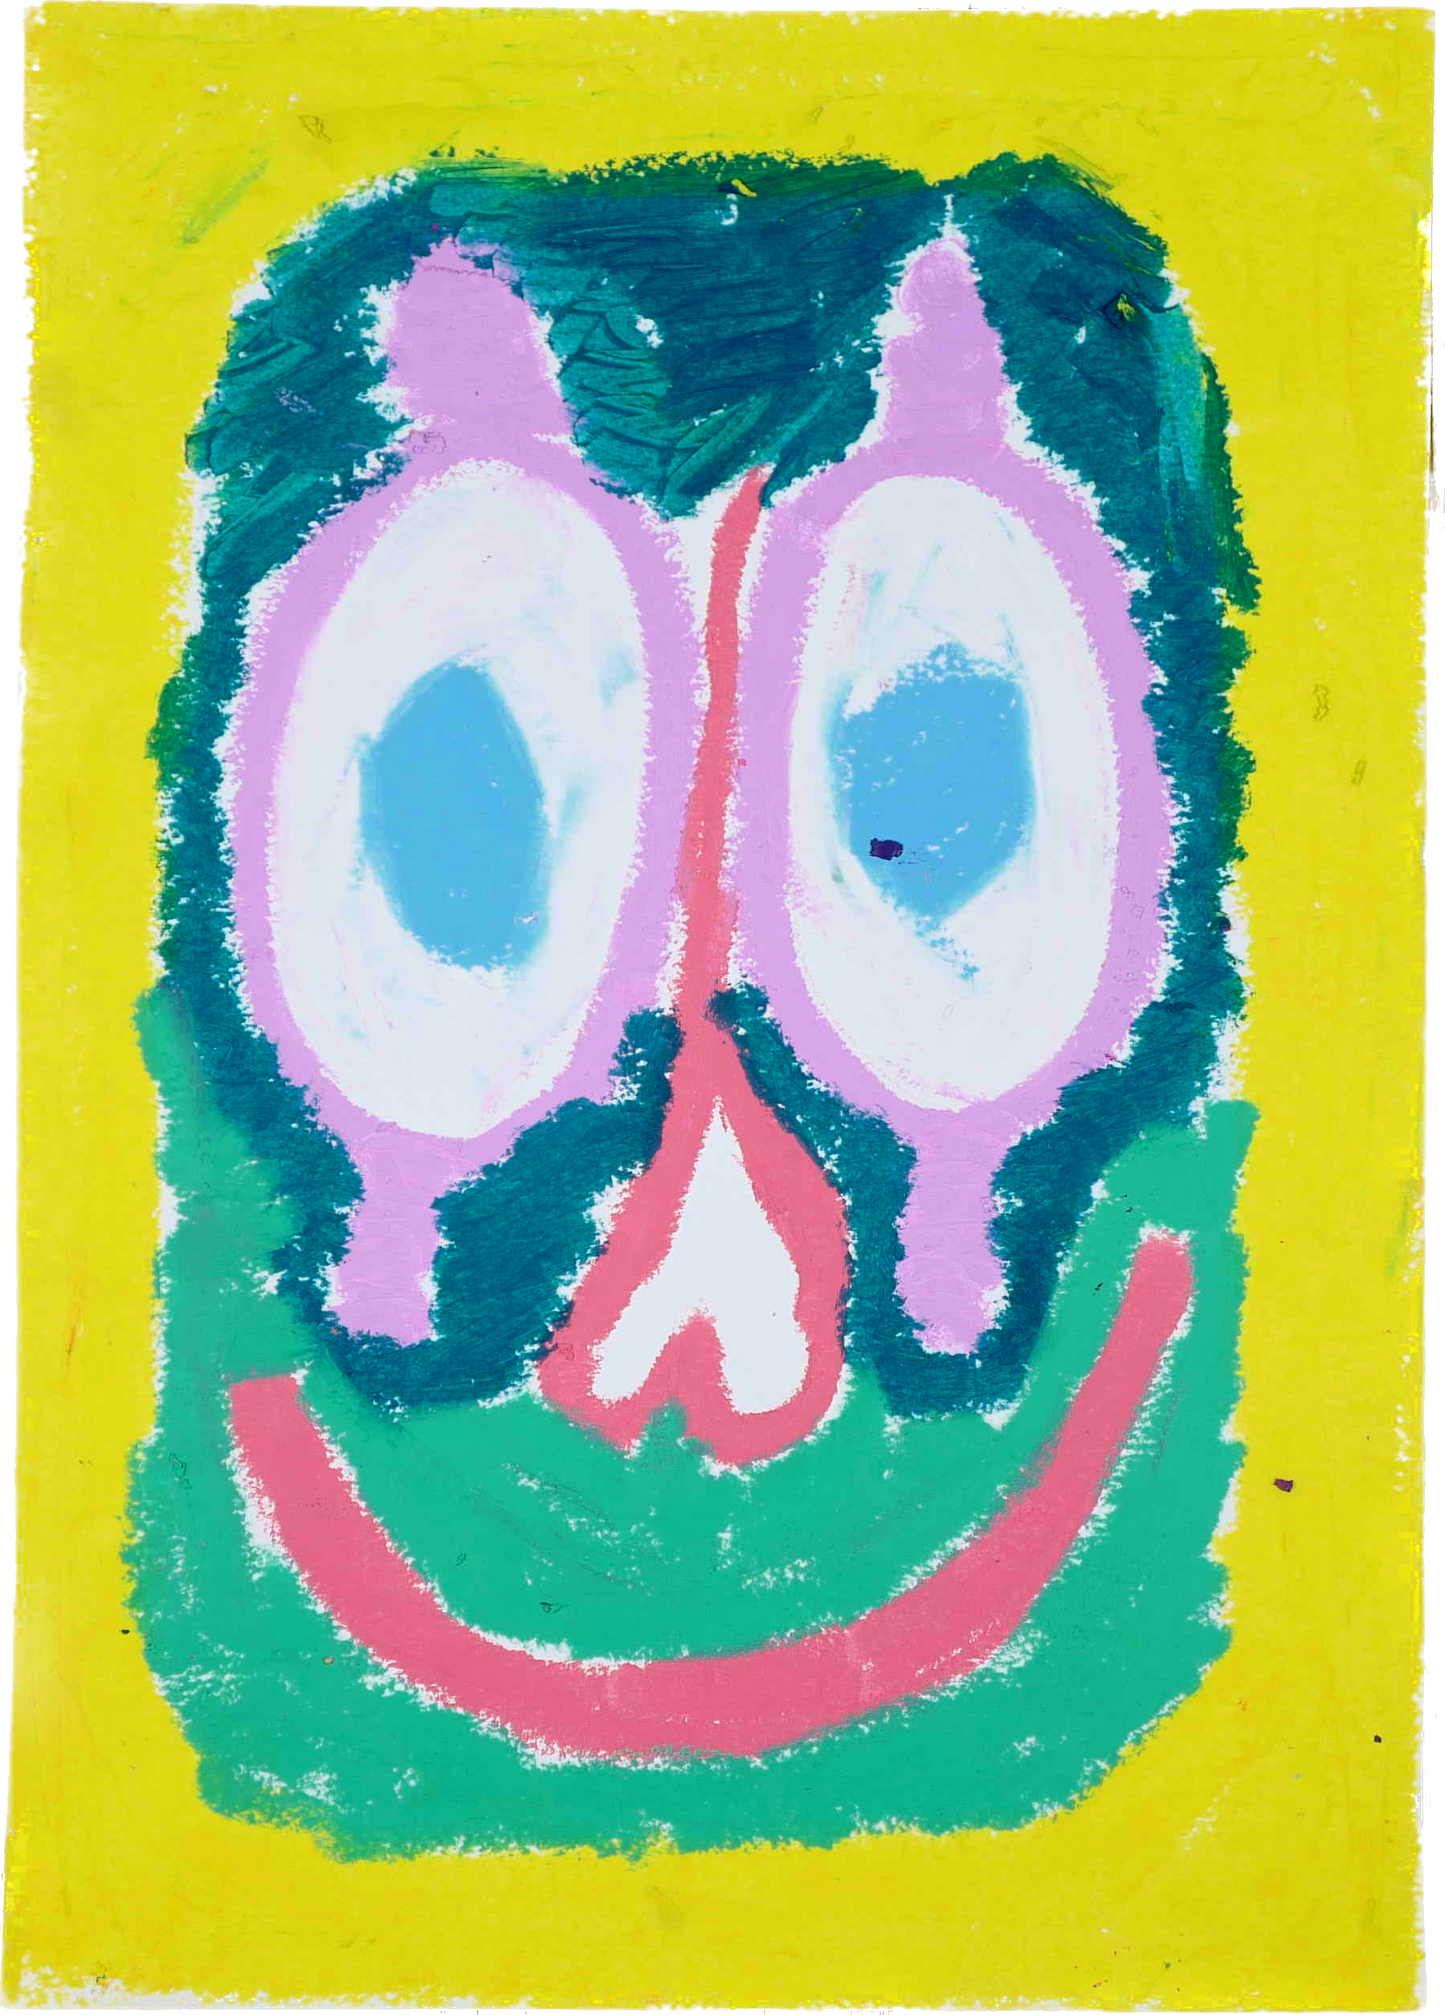 "Lenfantvivant abstract joyful face" "Sauna Fusion Art with cheerful palette" "No. 157 abstract expressionist joy" "Colorful whimsy in modern art" "Lenfantvivant's vibrant facial abstraction"